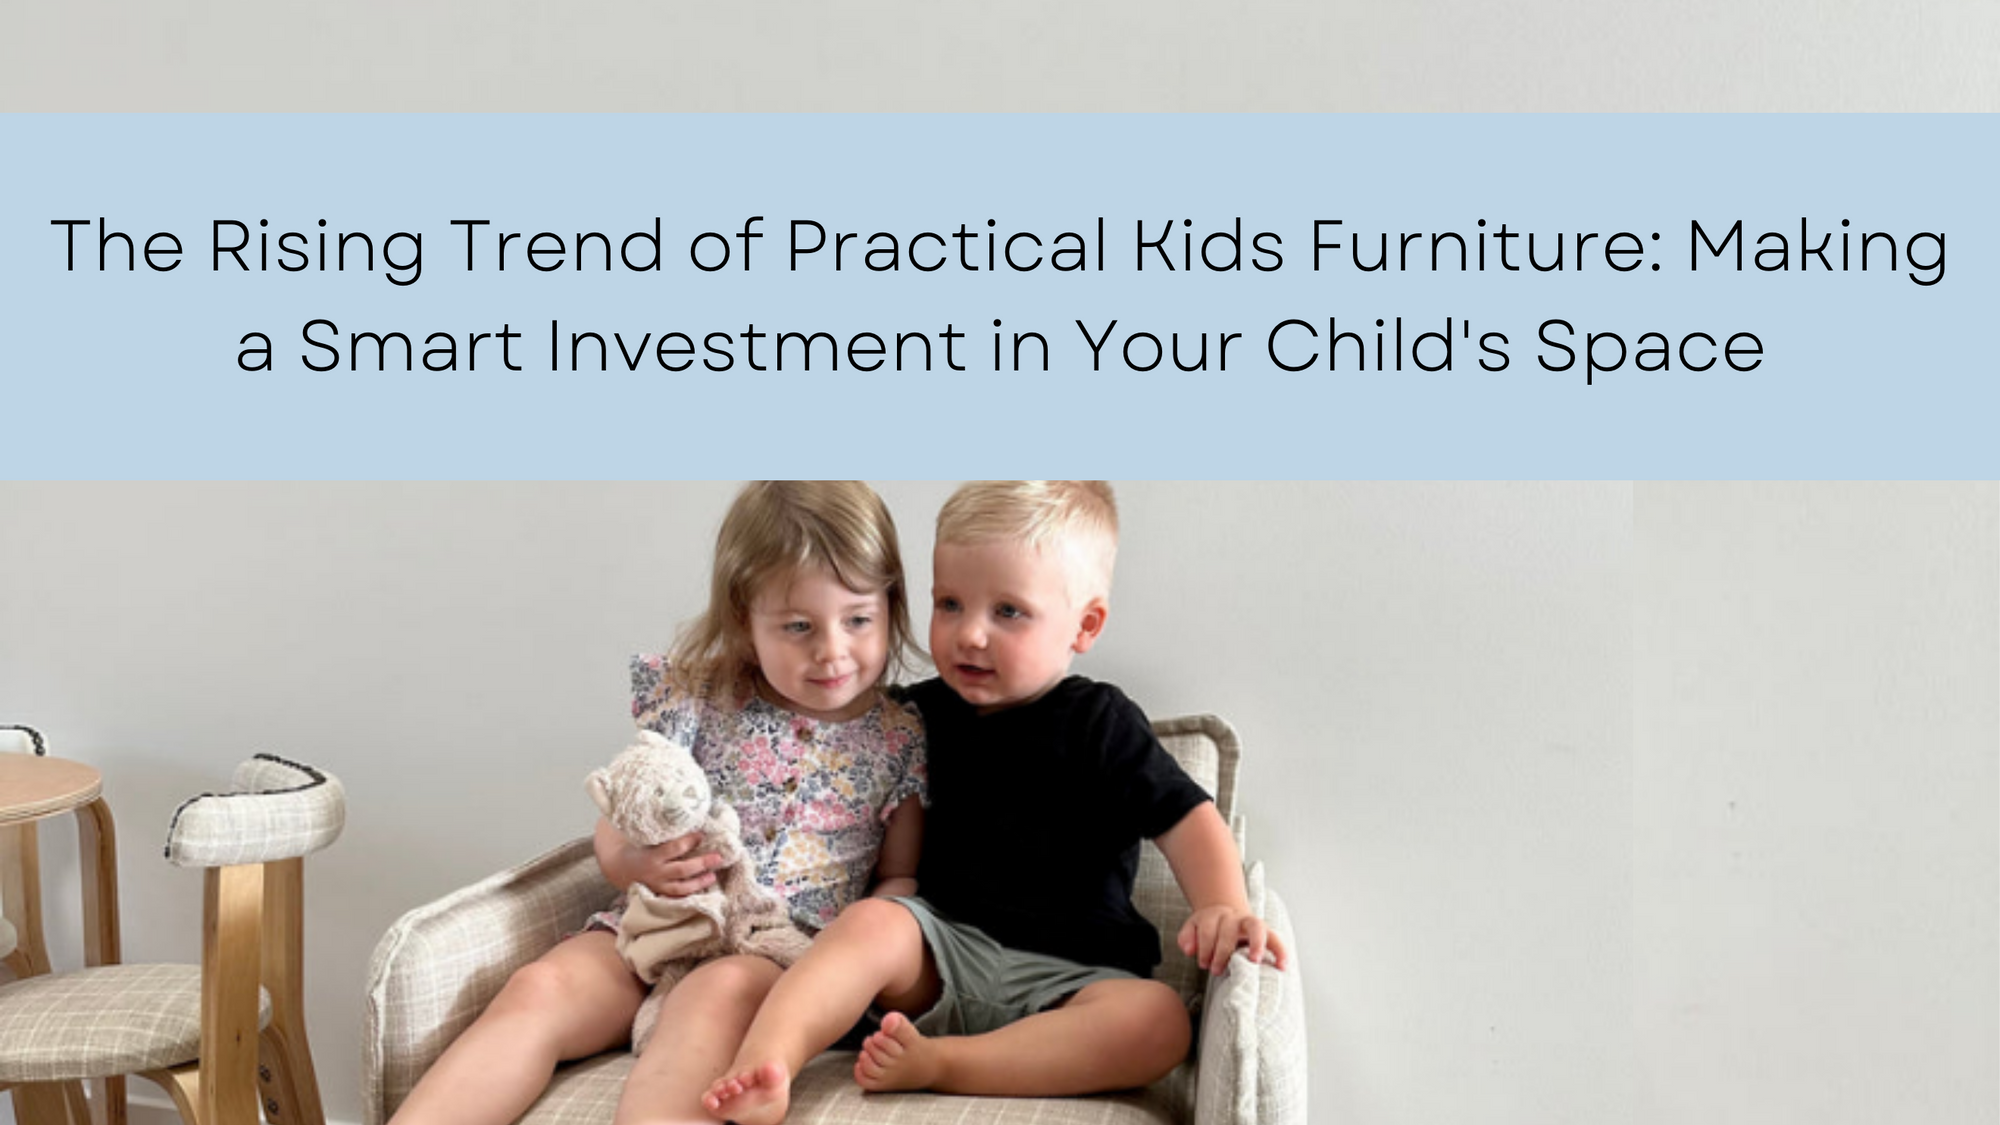 The Rising Trend of Practical Kids Furniture: Making a Smart Investment in Your Child's Space